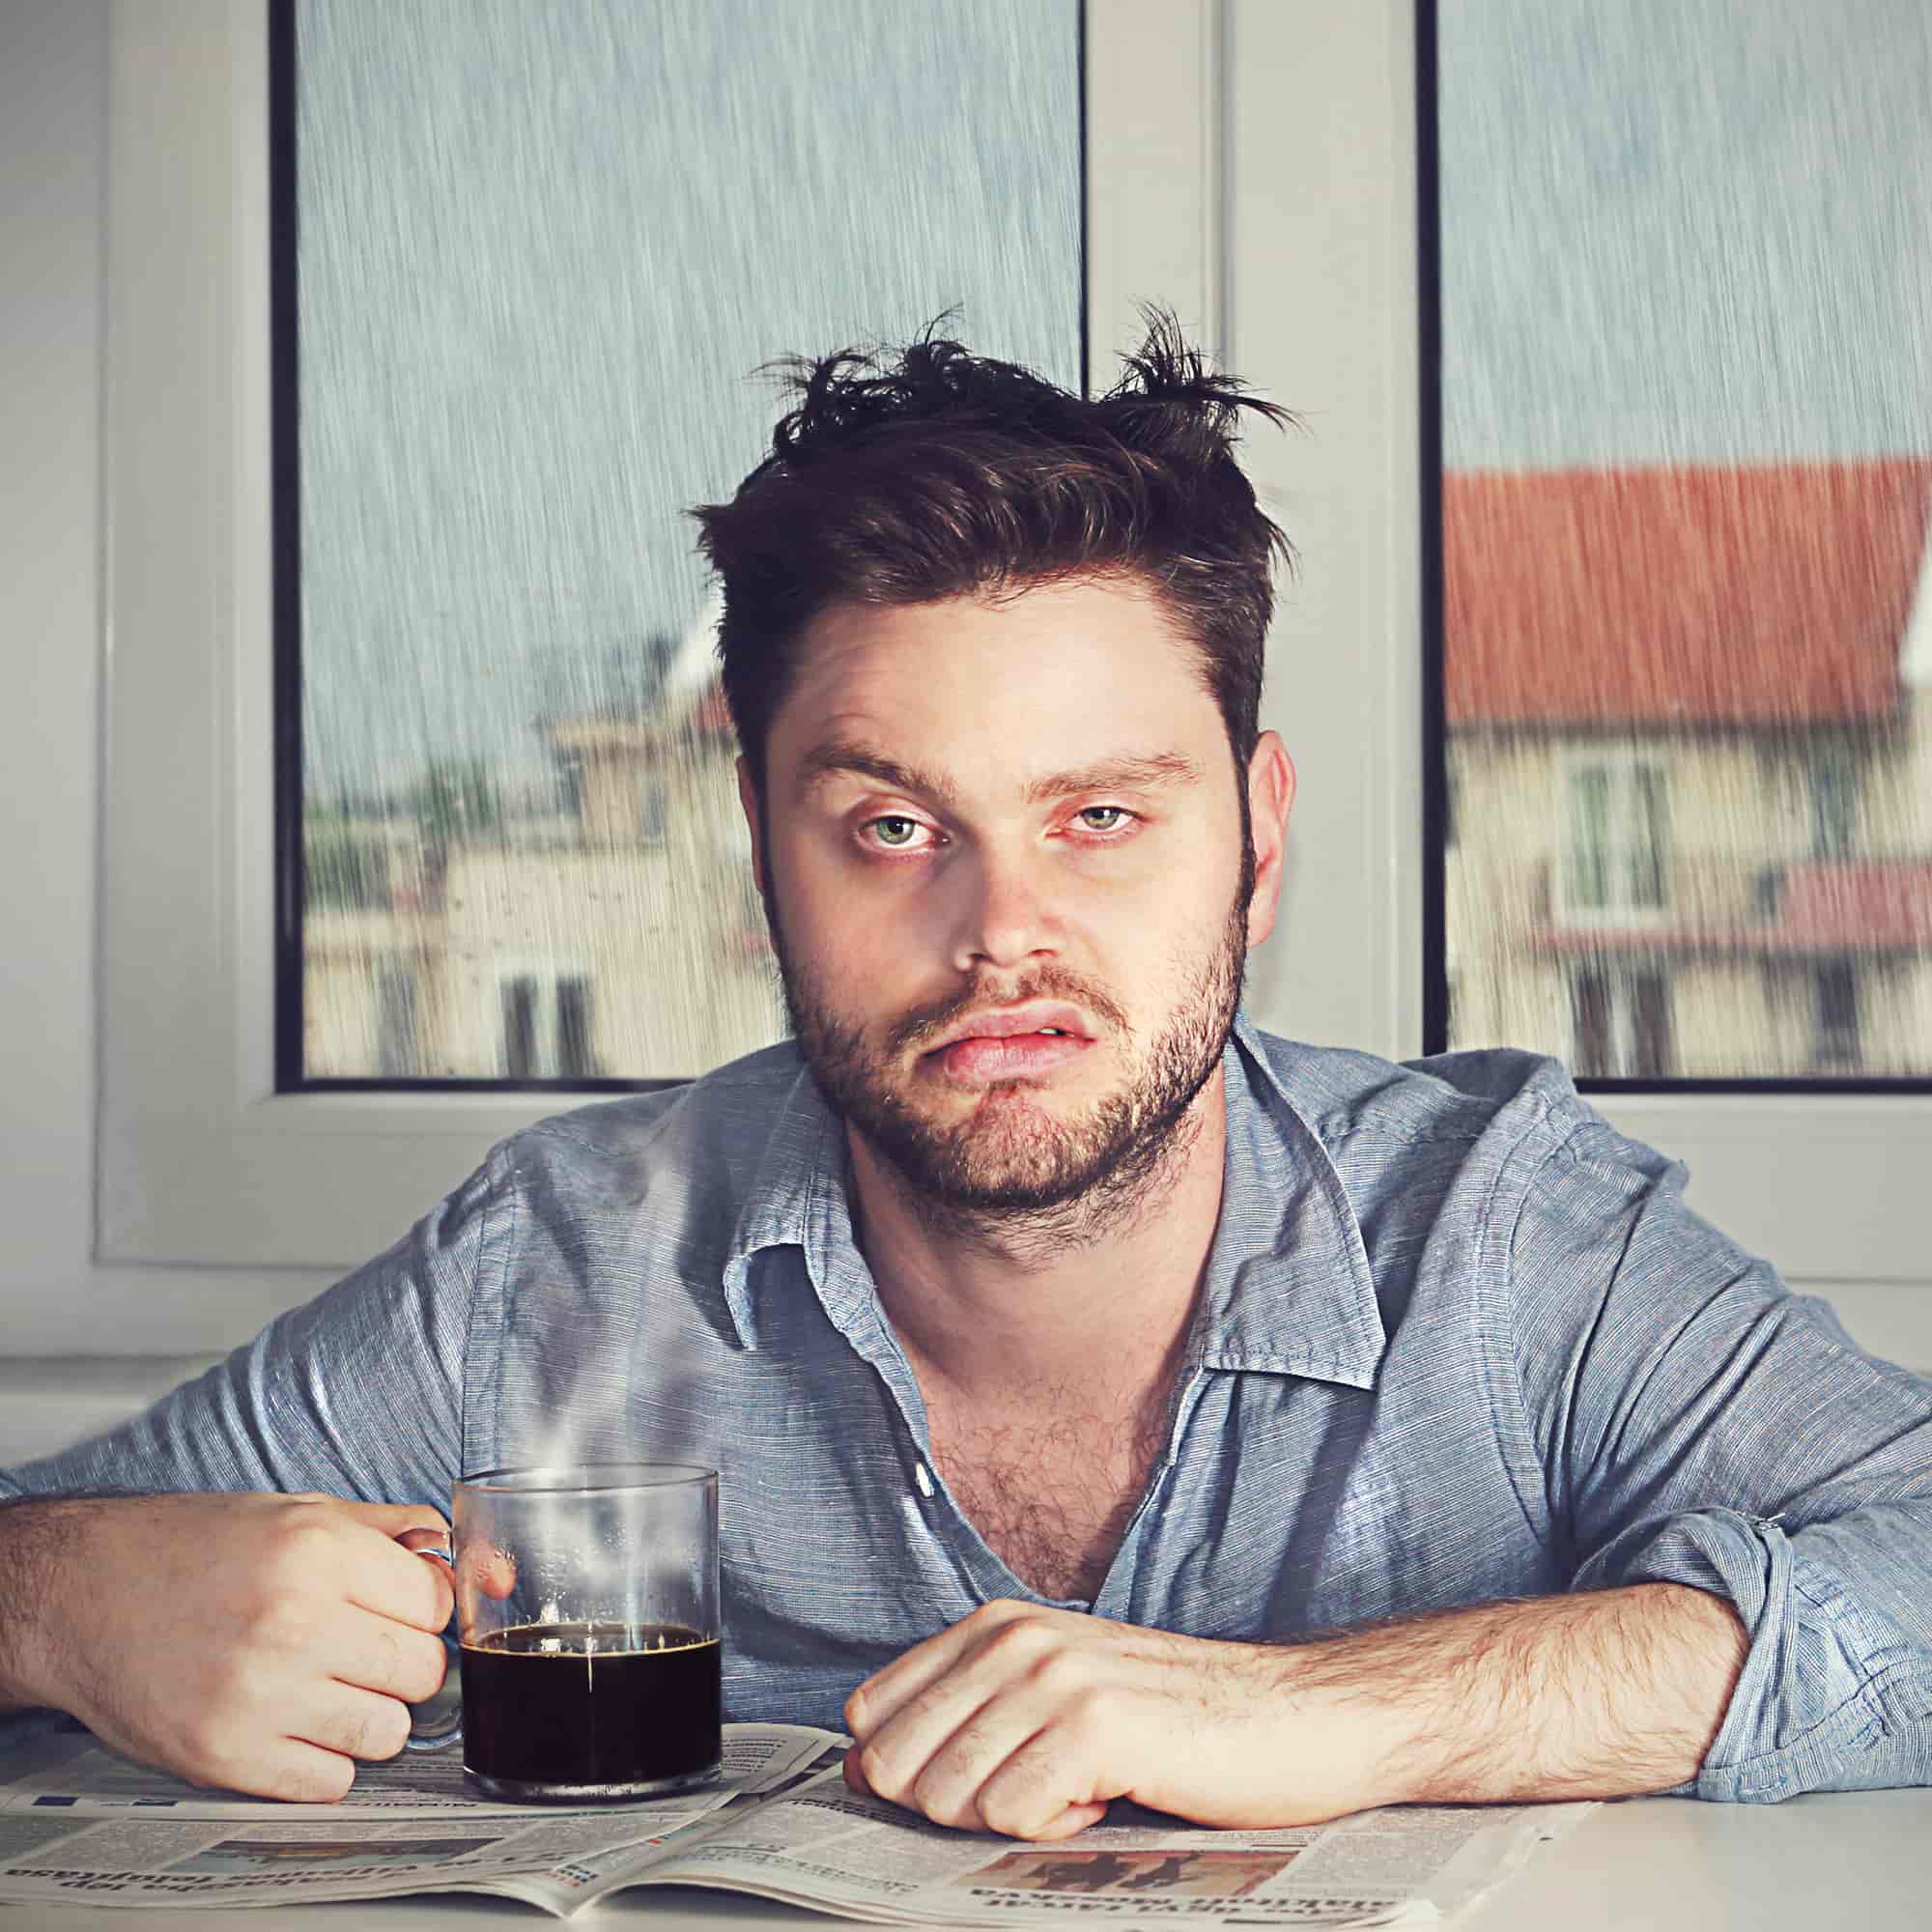 Should You Drink Coffee To Cure A Hangover?